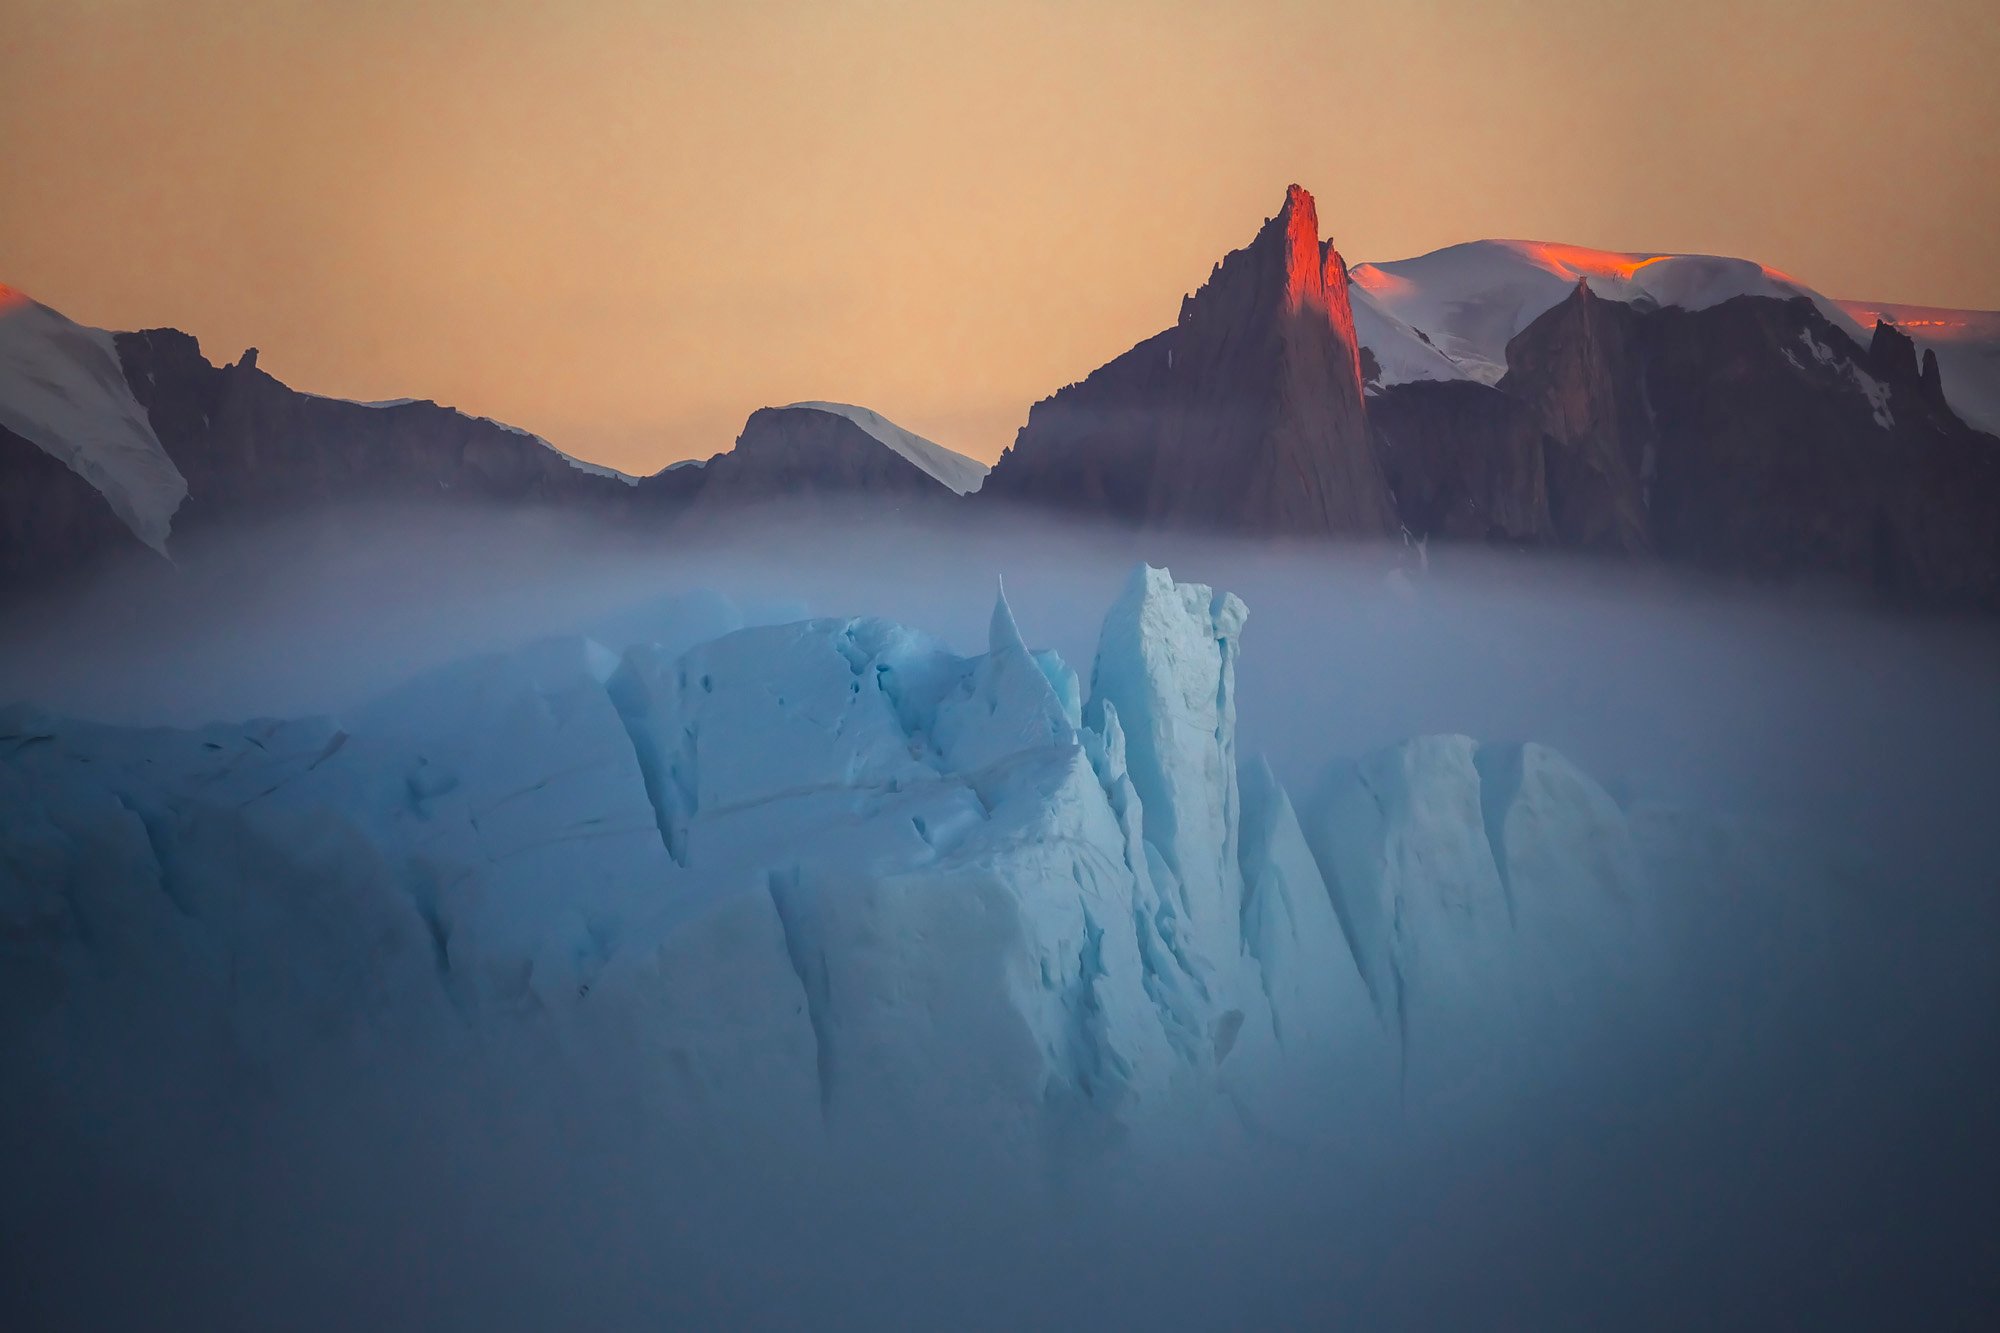 "Fog over the iceberg in Greenland. A very rare natural phenomenon. This is a huge iceberg that swam past the coast, shrouded in fog." Image: Vladimir Alekseev/www.tpoty.com